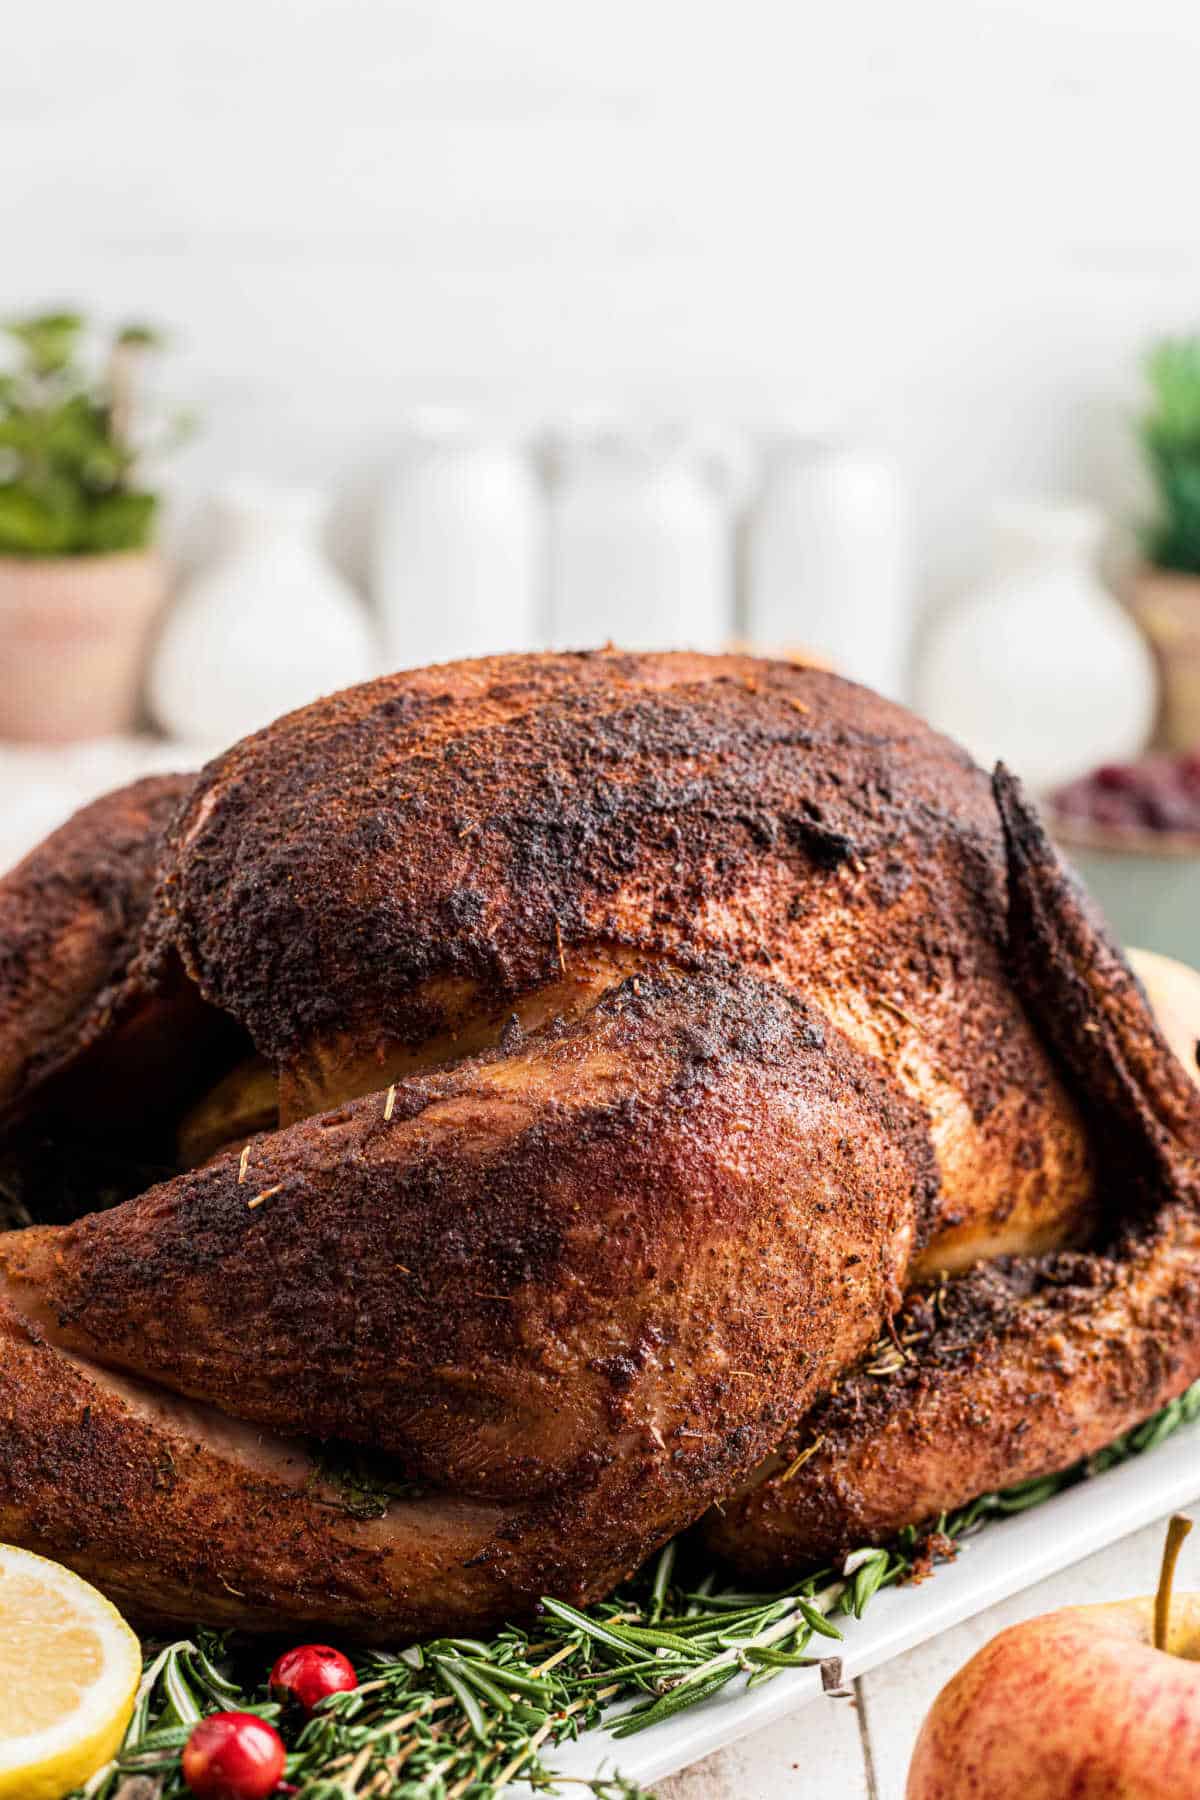 A whole turkey from the side, that has been cooked with a smoked turkey injection recipe.